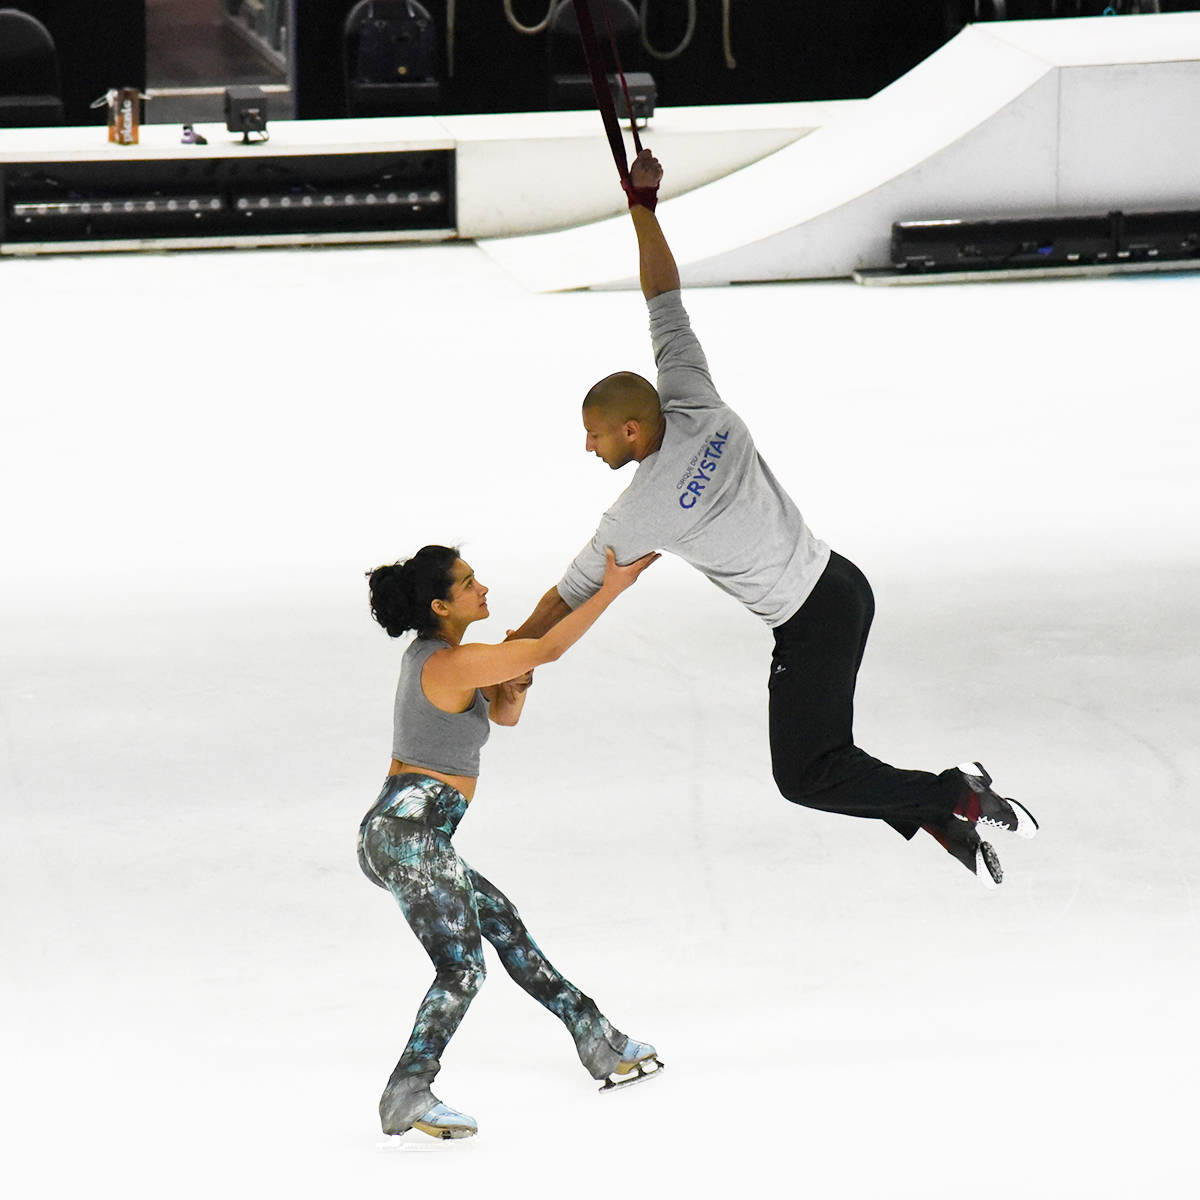 OPENING NIGHT REHEARSAL - Nobahar Dadui, who plays Crystal, and Jerome Sordillon, aerial strap specialist, enact a romantic scene from the “breakthrough ice experience” in a practise before opening night.                                Michelle Falk/Red Deer Express